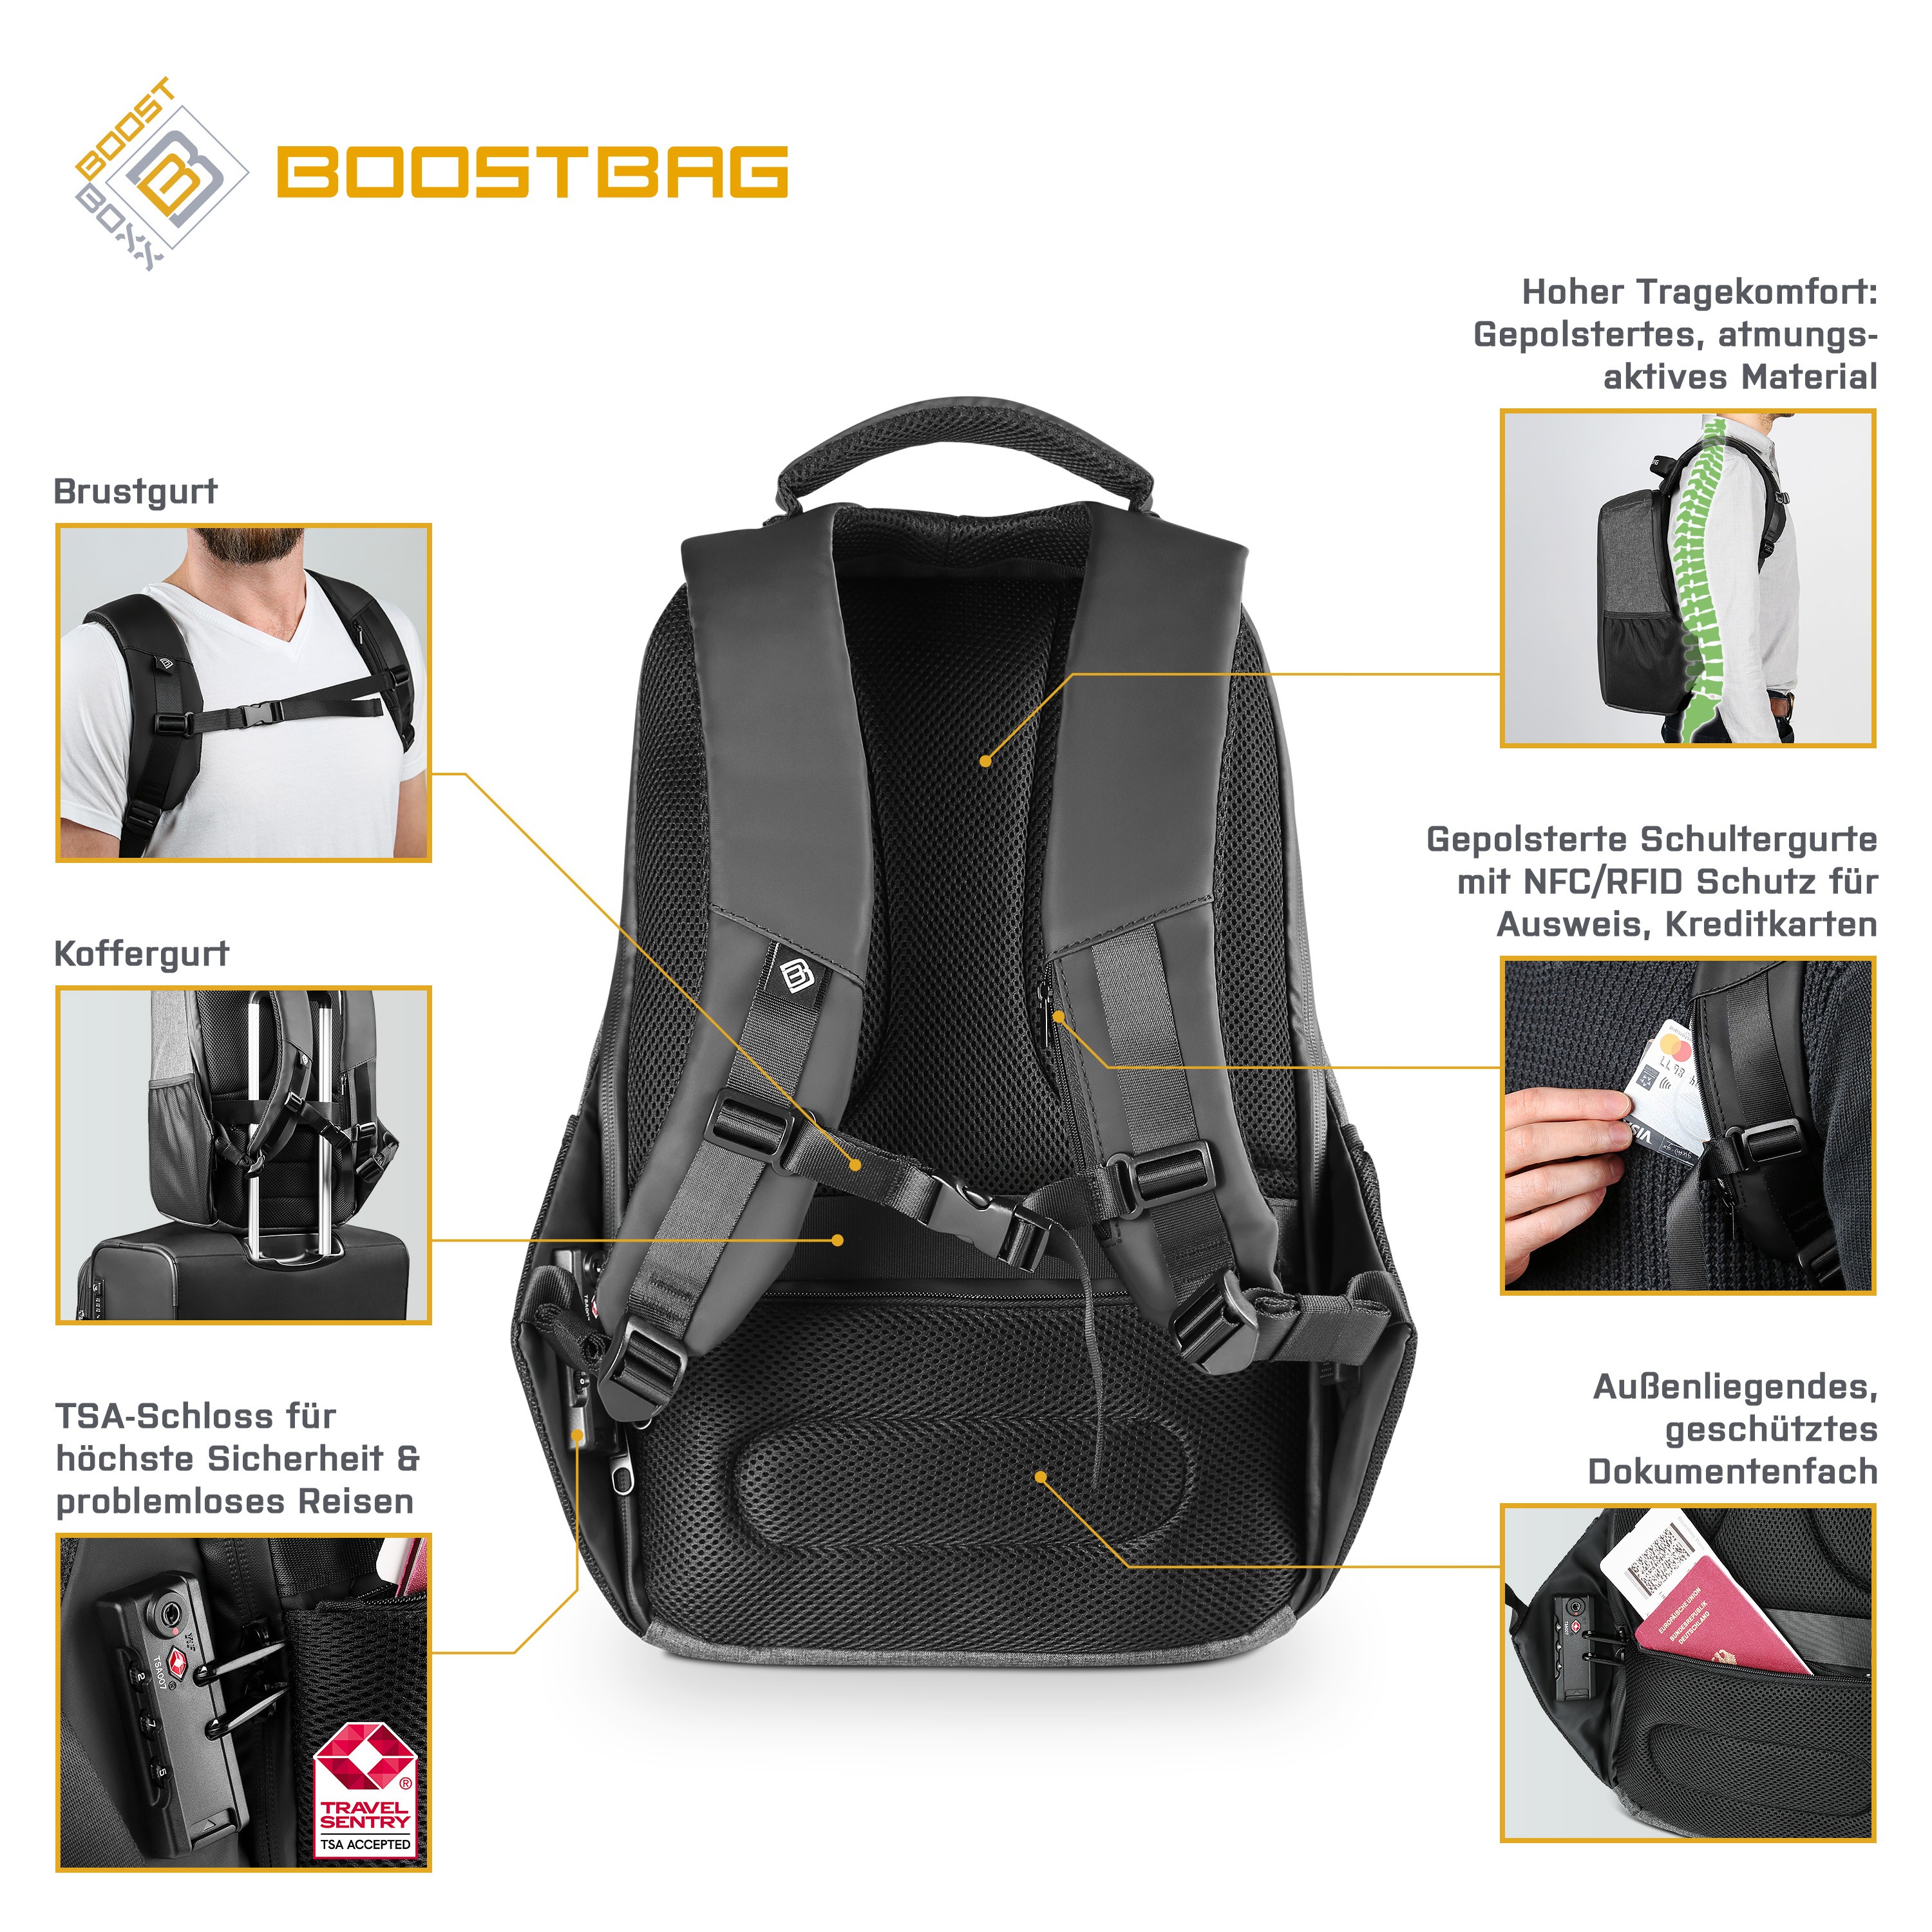 CSL Computer BoostBoxx BoostBag | - Notebook to backpack up